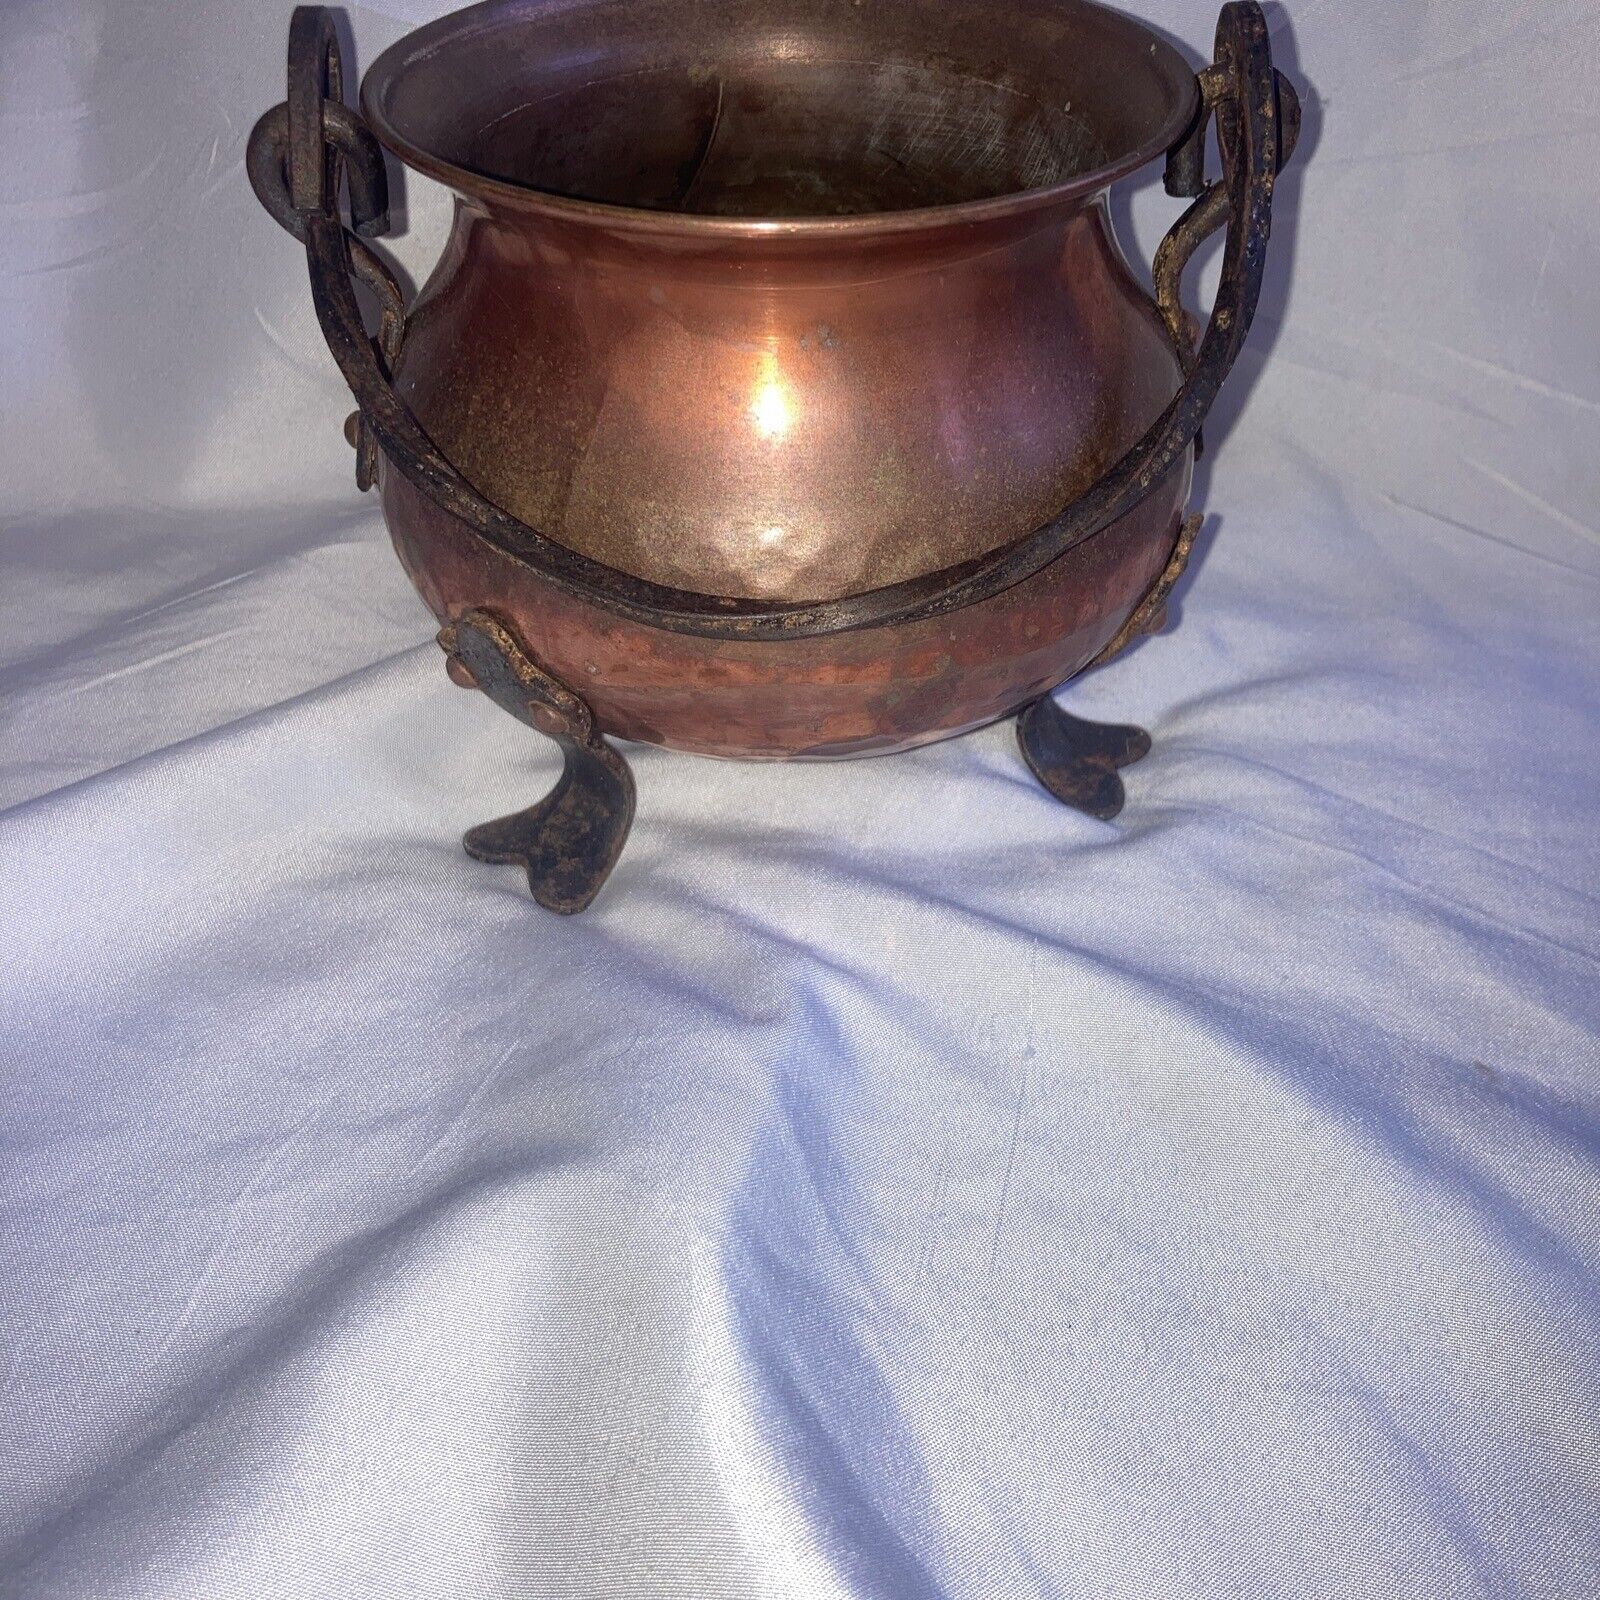 Vintage GEKRO Hammered Copper 5 Inch Kettle Cauldron Wrought Iron Handle Germany